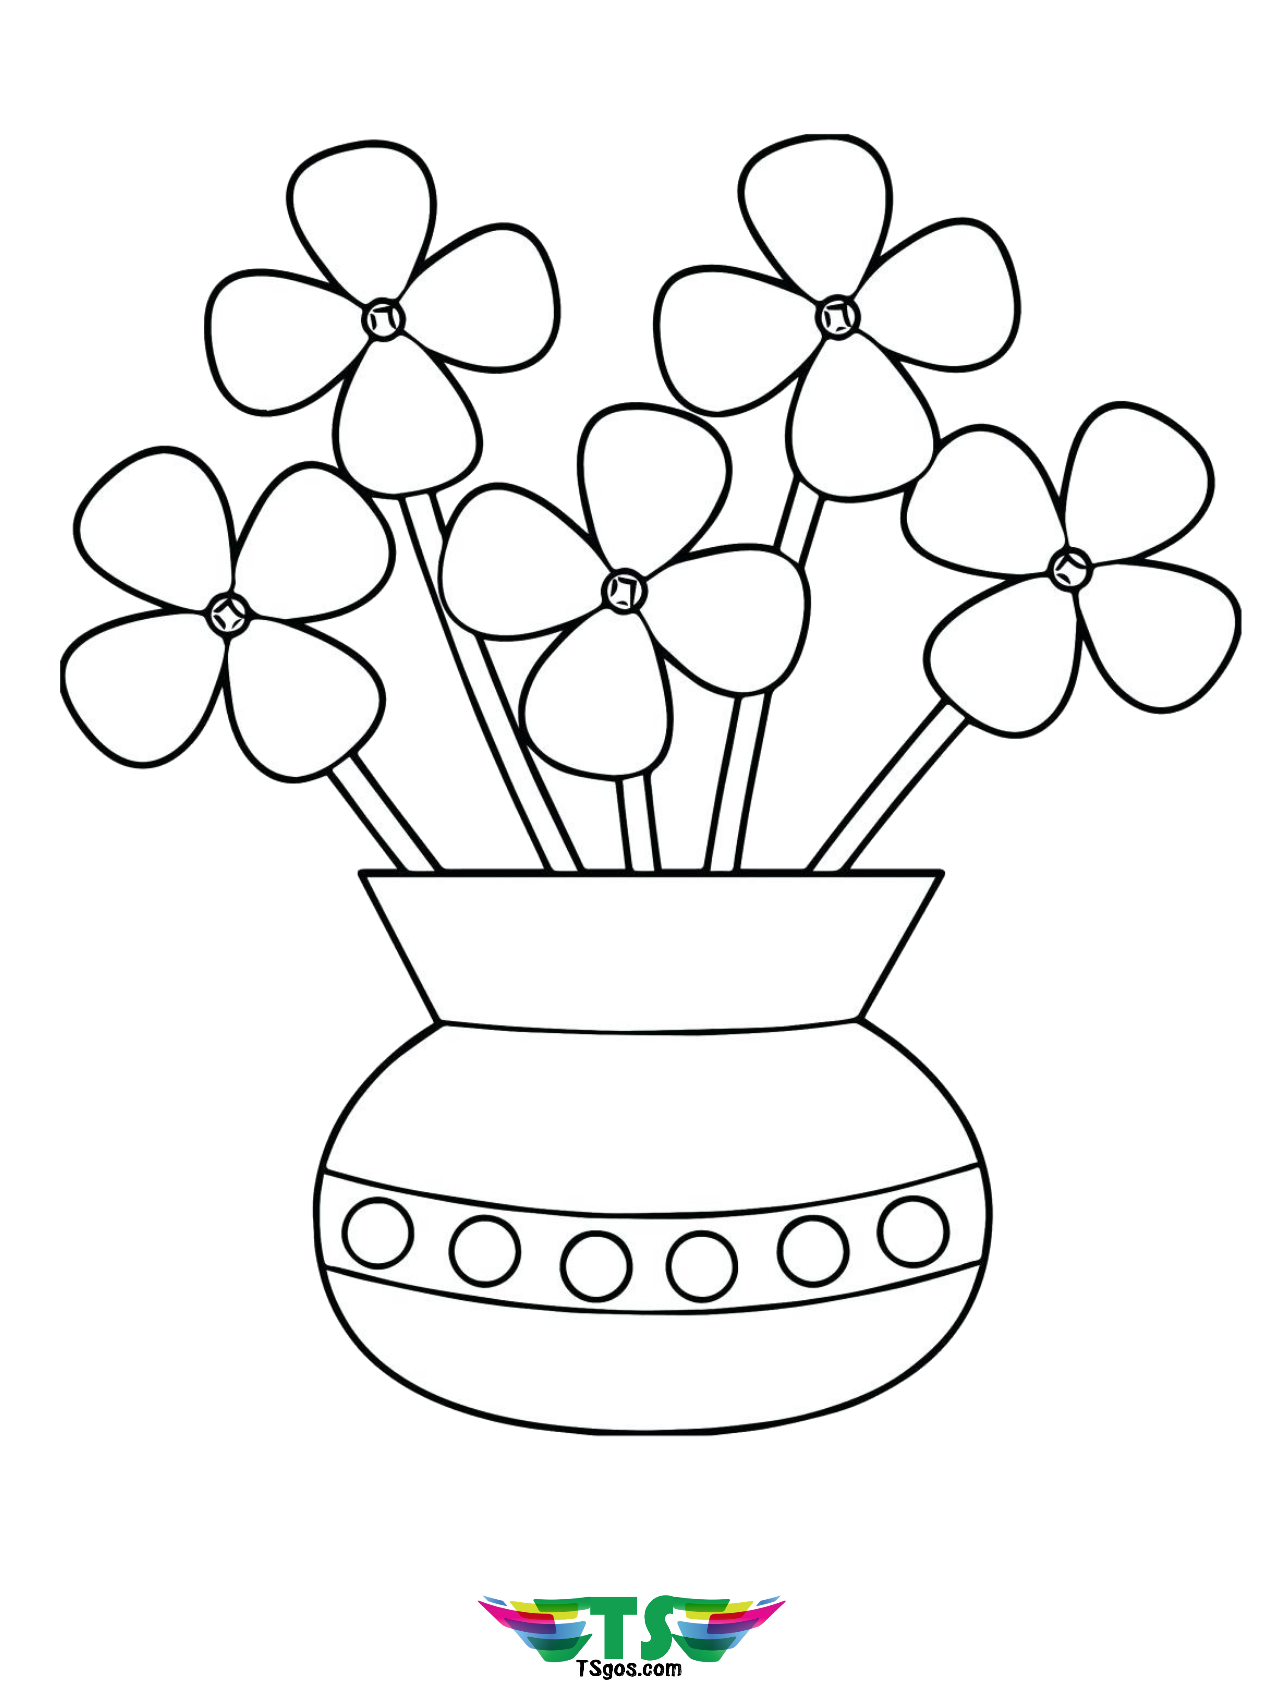 Printable Flowers in a Vase Coloring Page Wallpaper